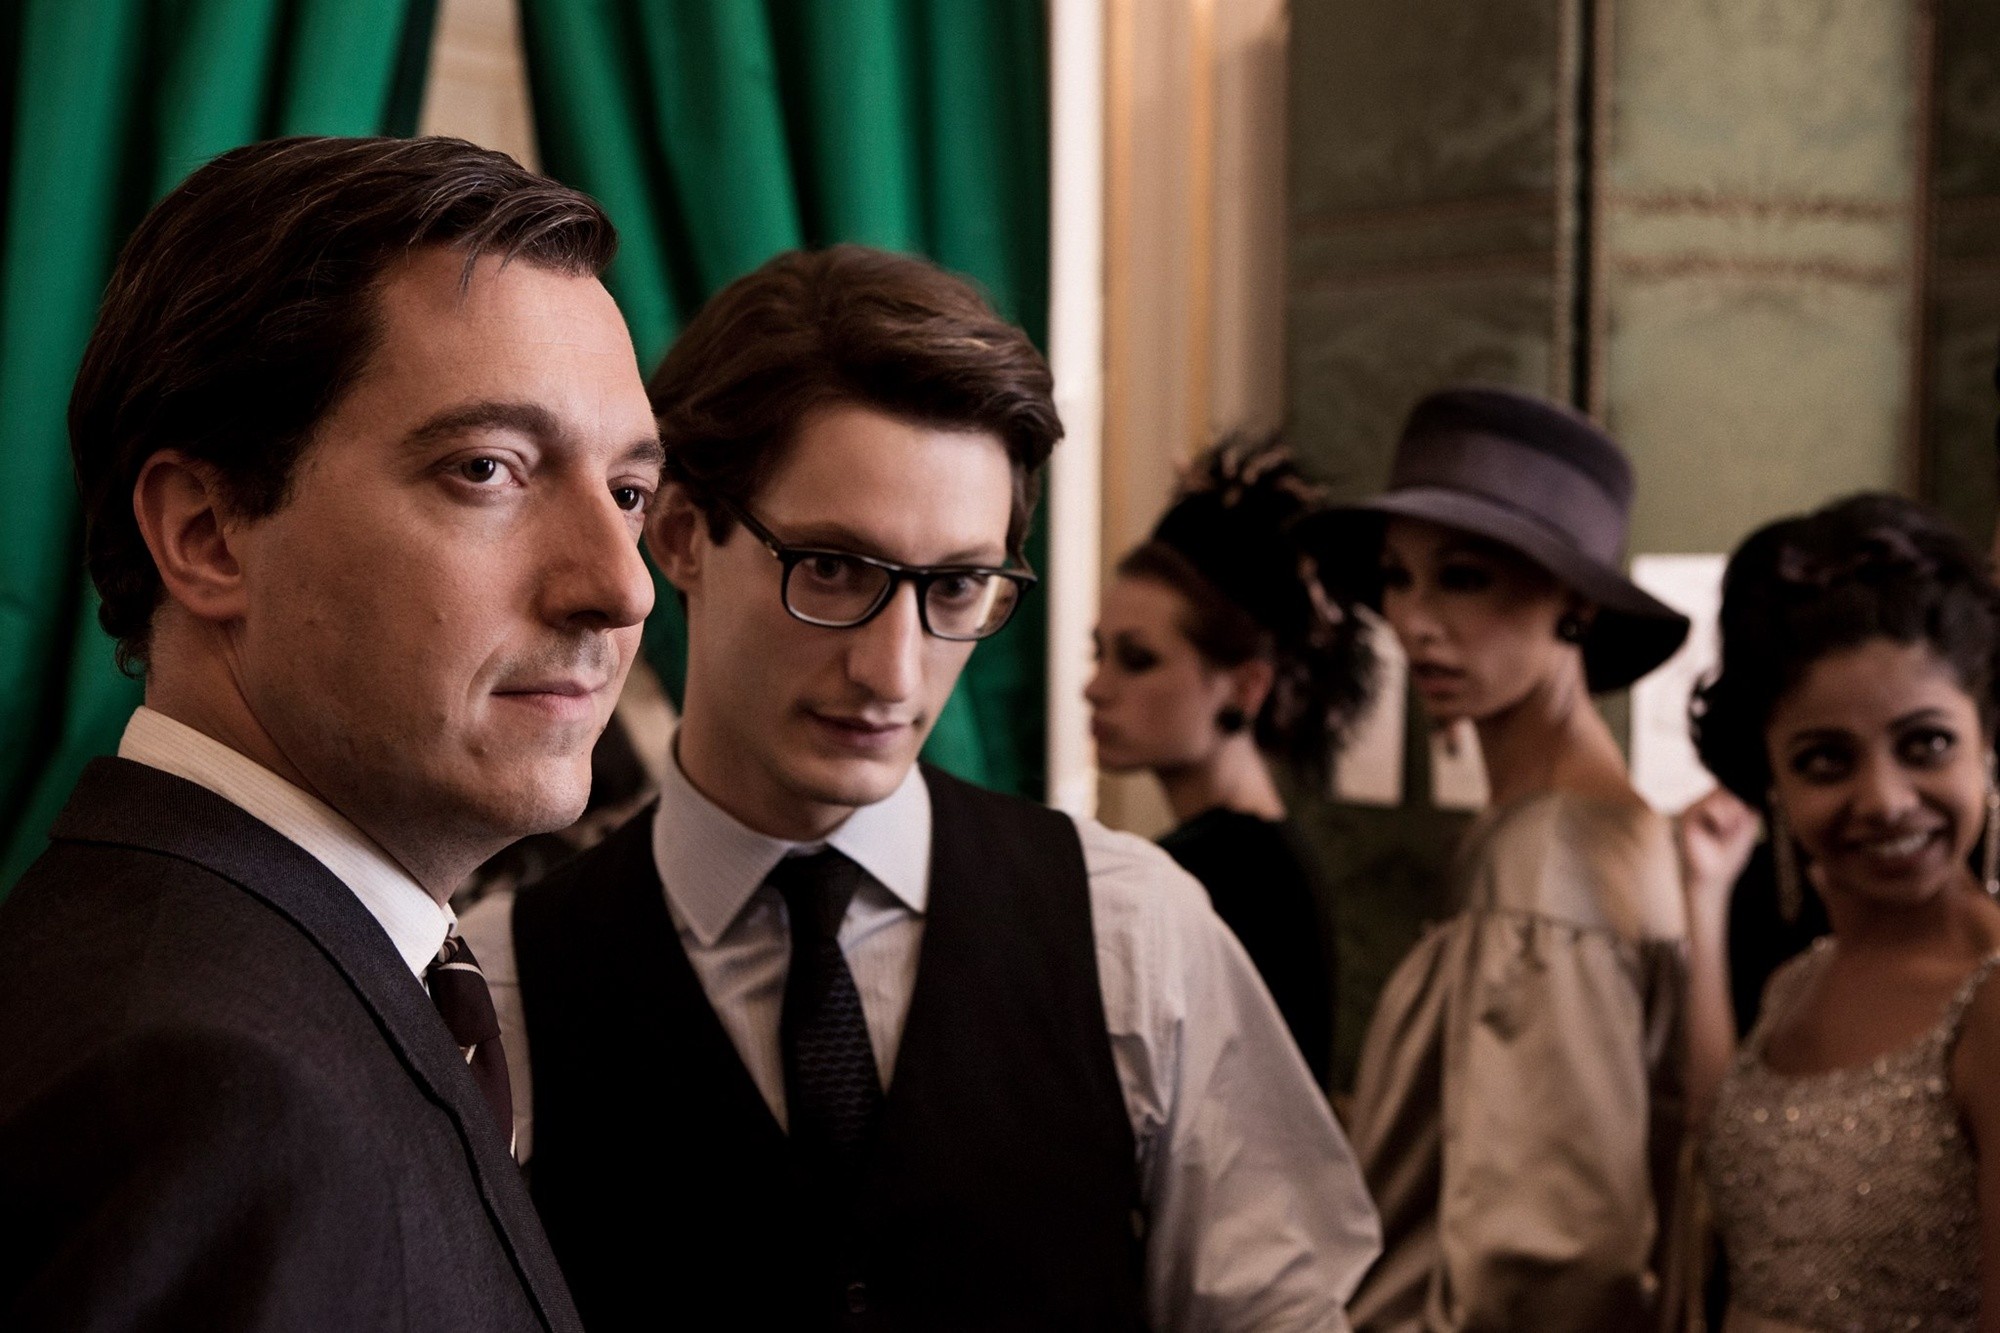 Guillaume Gallienne stars as Pierre Berge and Pierre Niney stars as Yves Saint Laurent in The Weinstein Company's Yves Saint Laurent (2014)